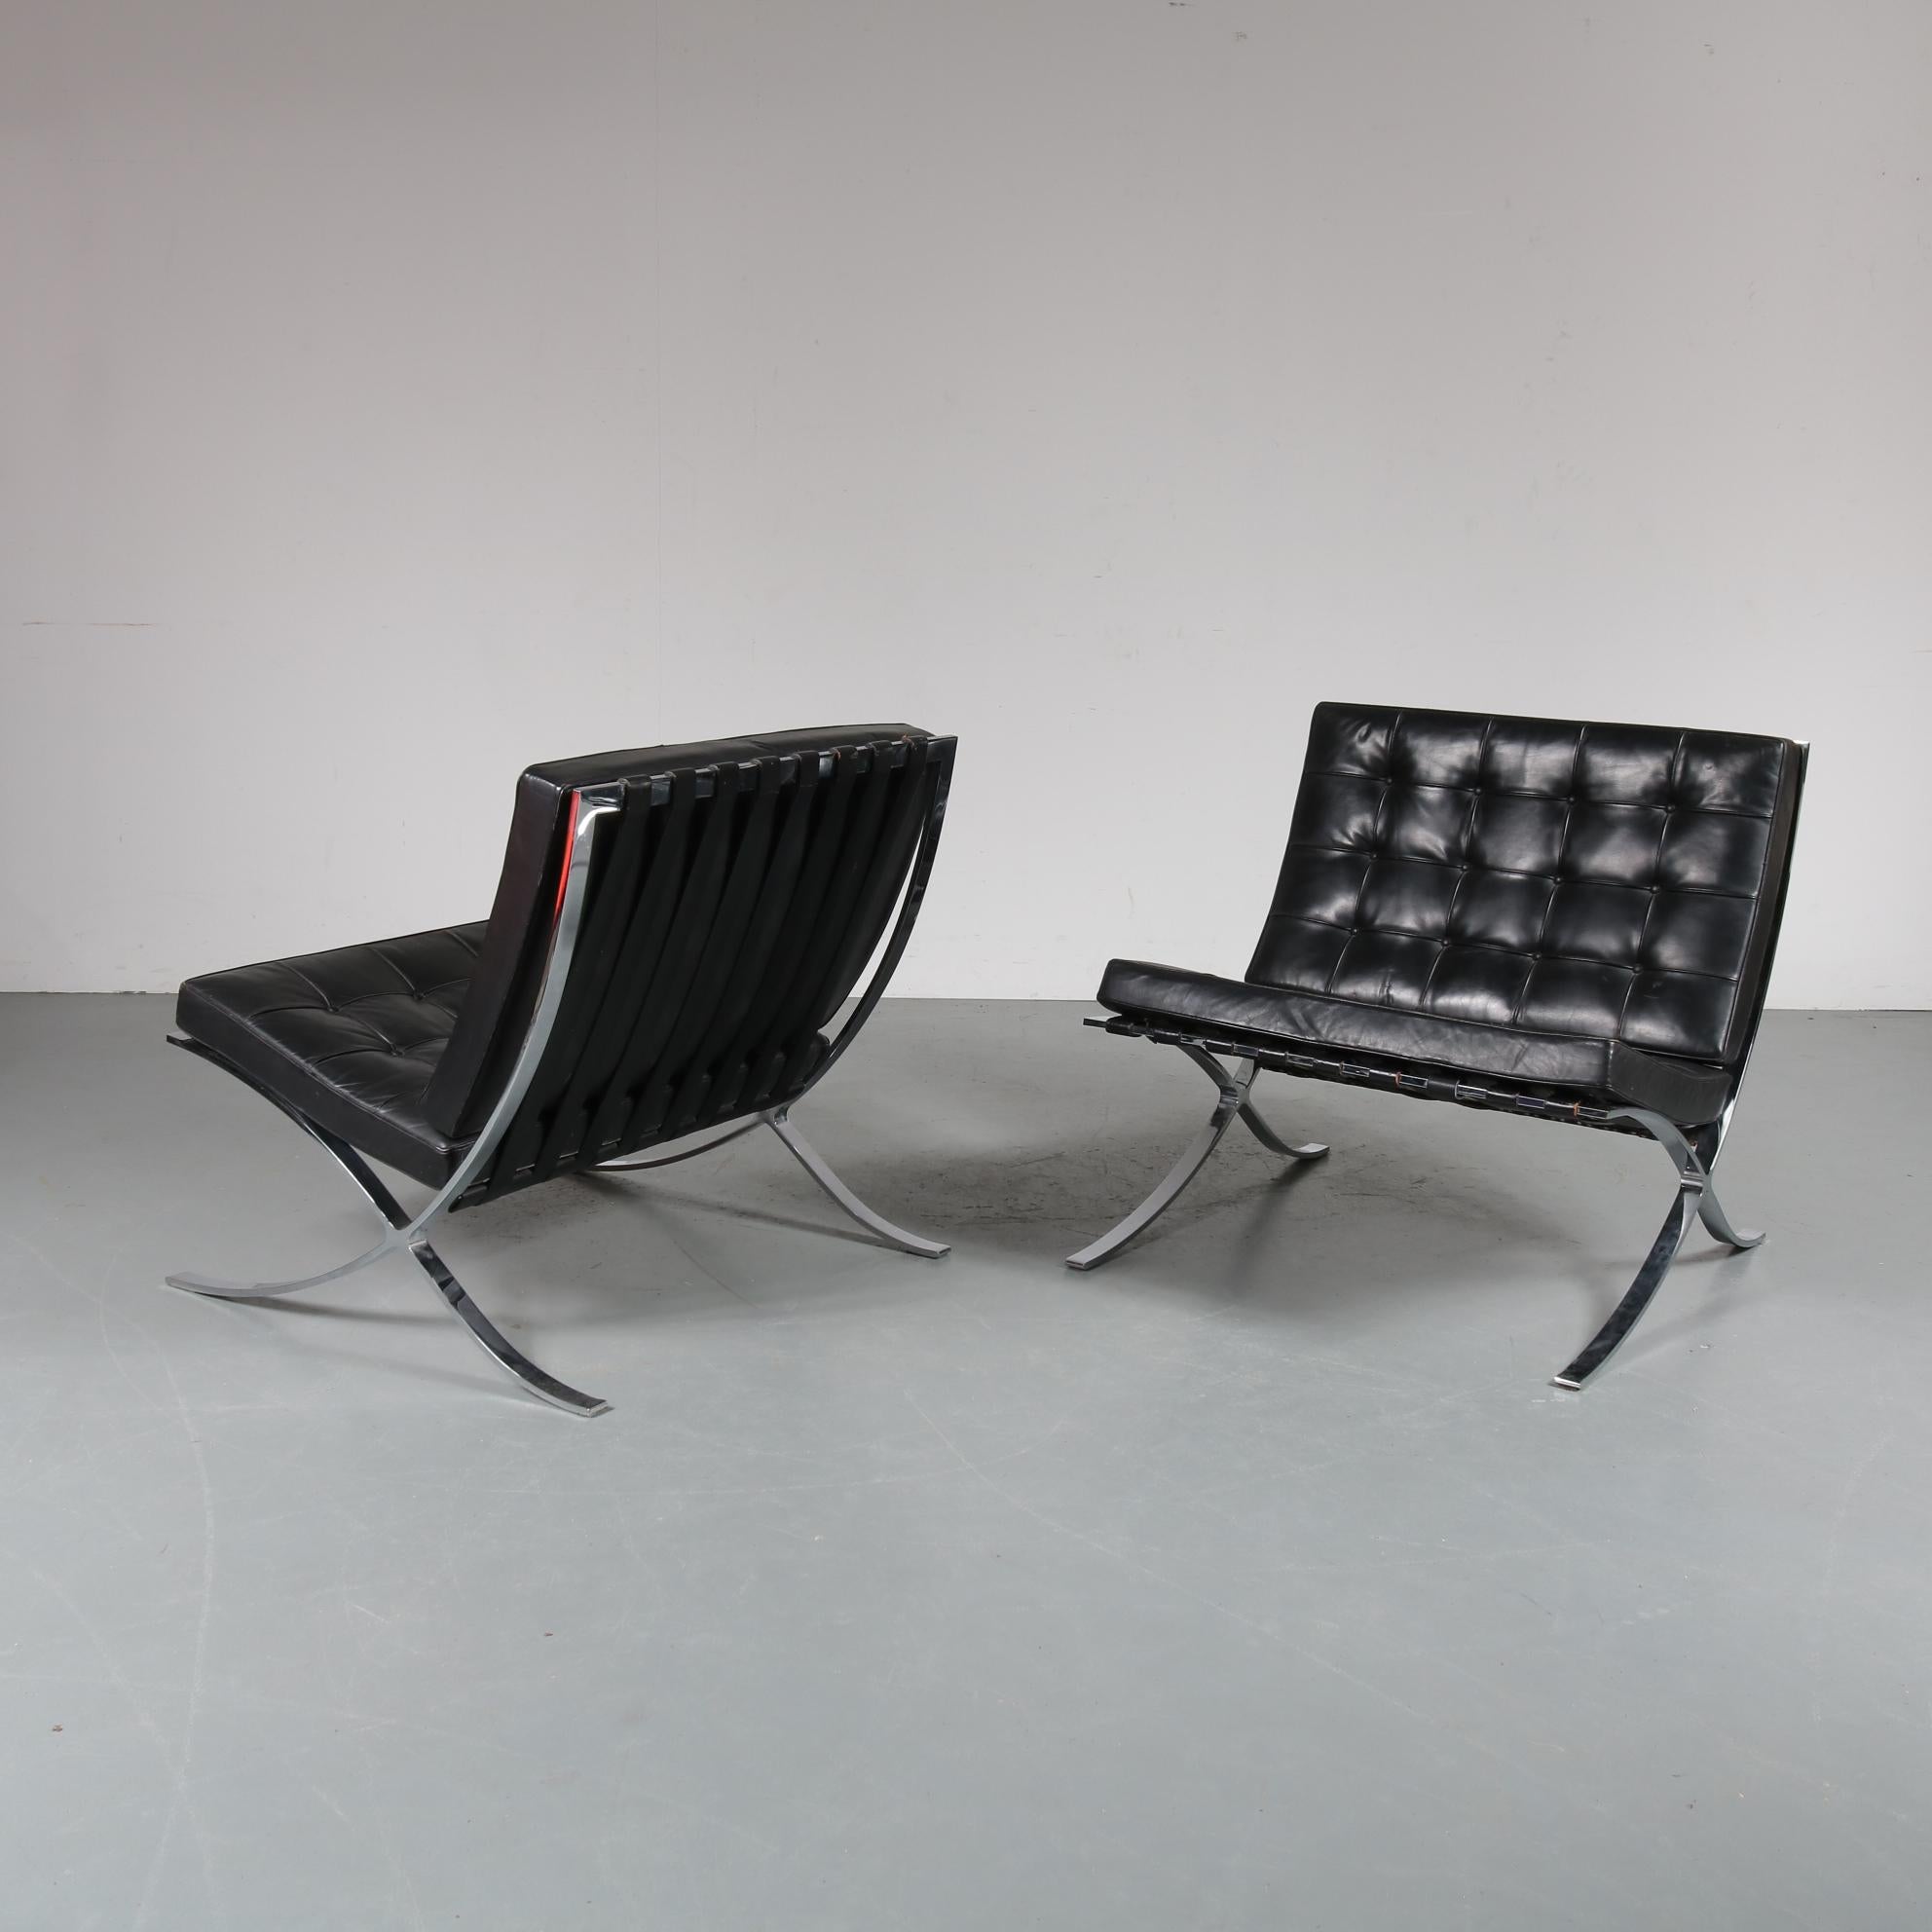 A beautiful pair of Barcelona chairs, designed by Mies van der Rohe in 1929, manufactured by Knoll International in the USA around 1970.

These beautiful chairs are upholstered in black leather leather, giving them an extra sense of luxury. The